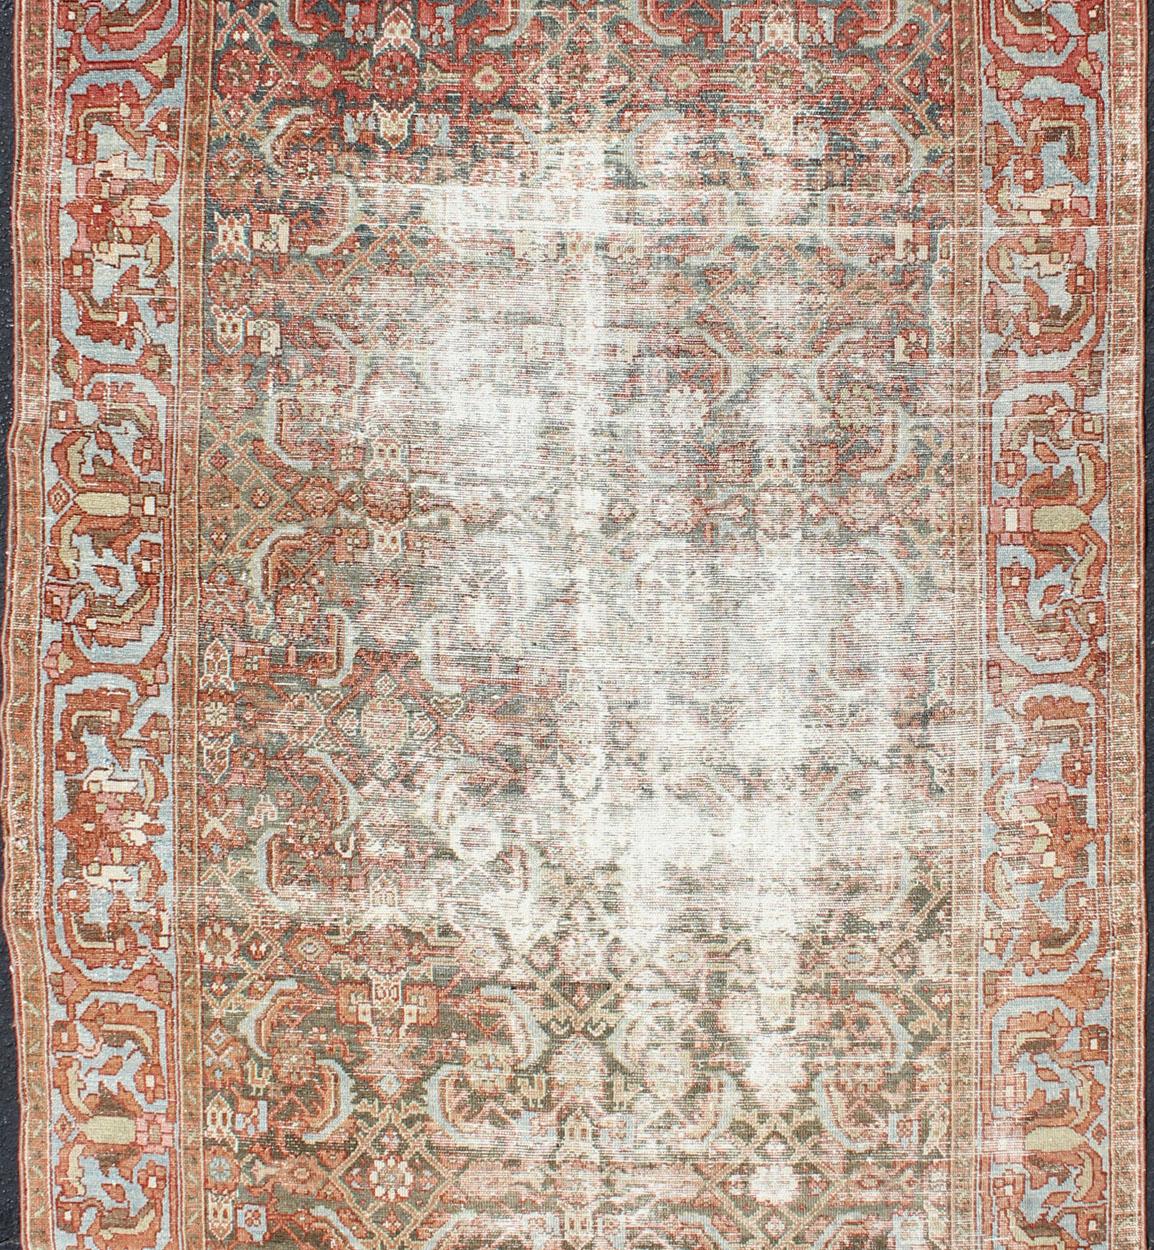 Malayer Elegant Geometric All-Over Persian Hamadan Runner in Orange and Red Tones For Sale